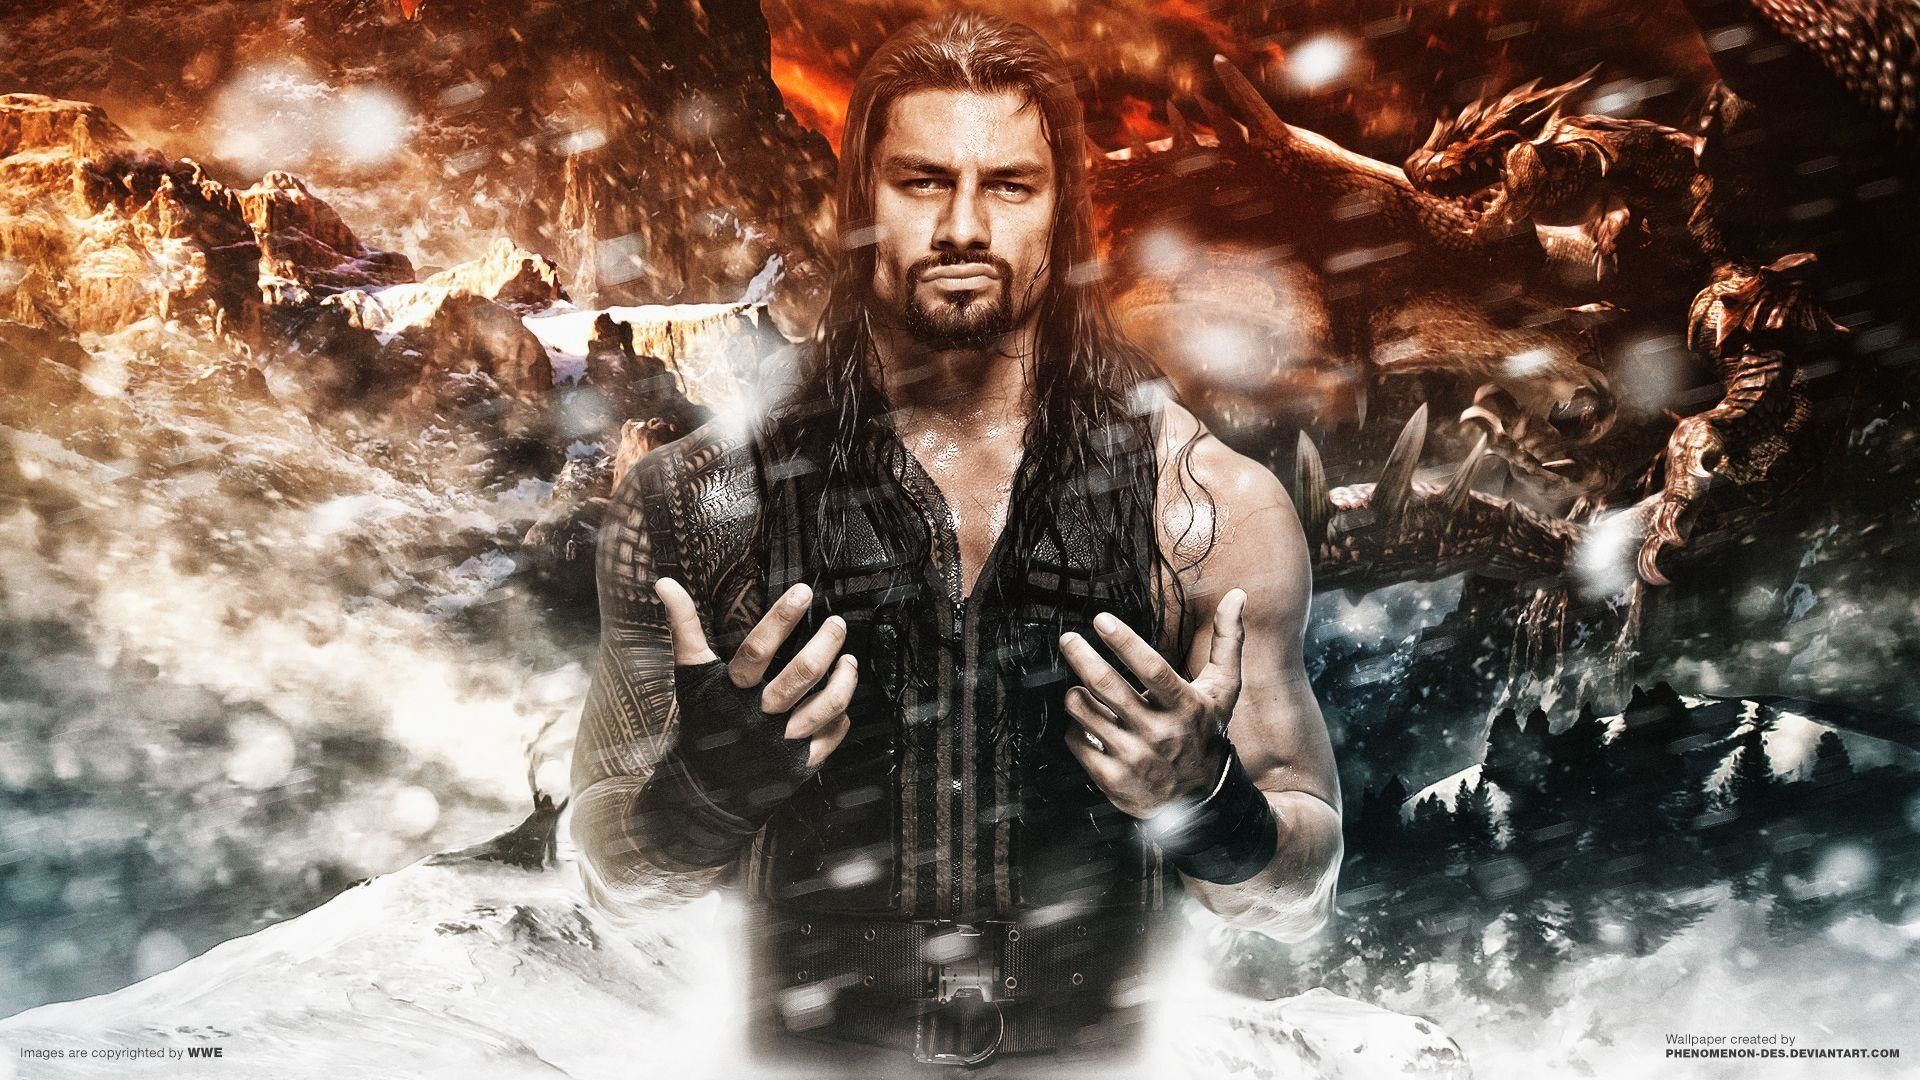 Roman Reigns Wwe Wallpaper background picture